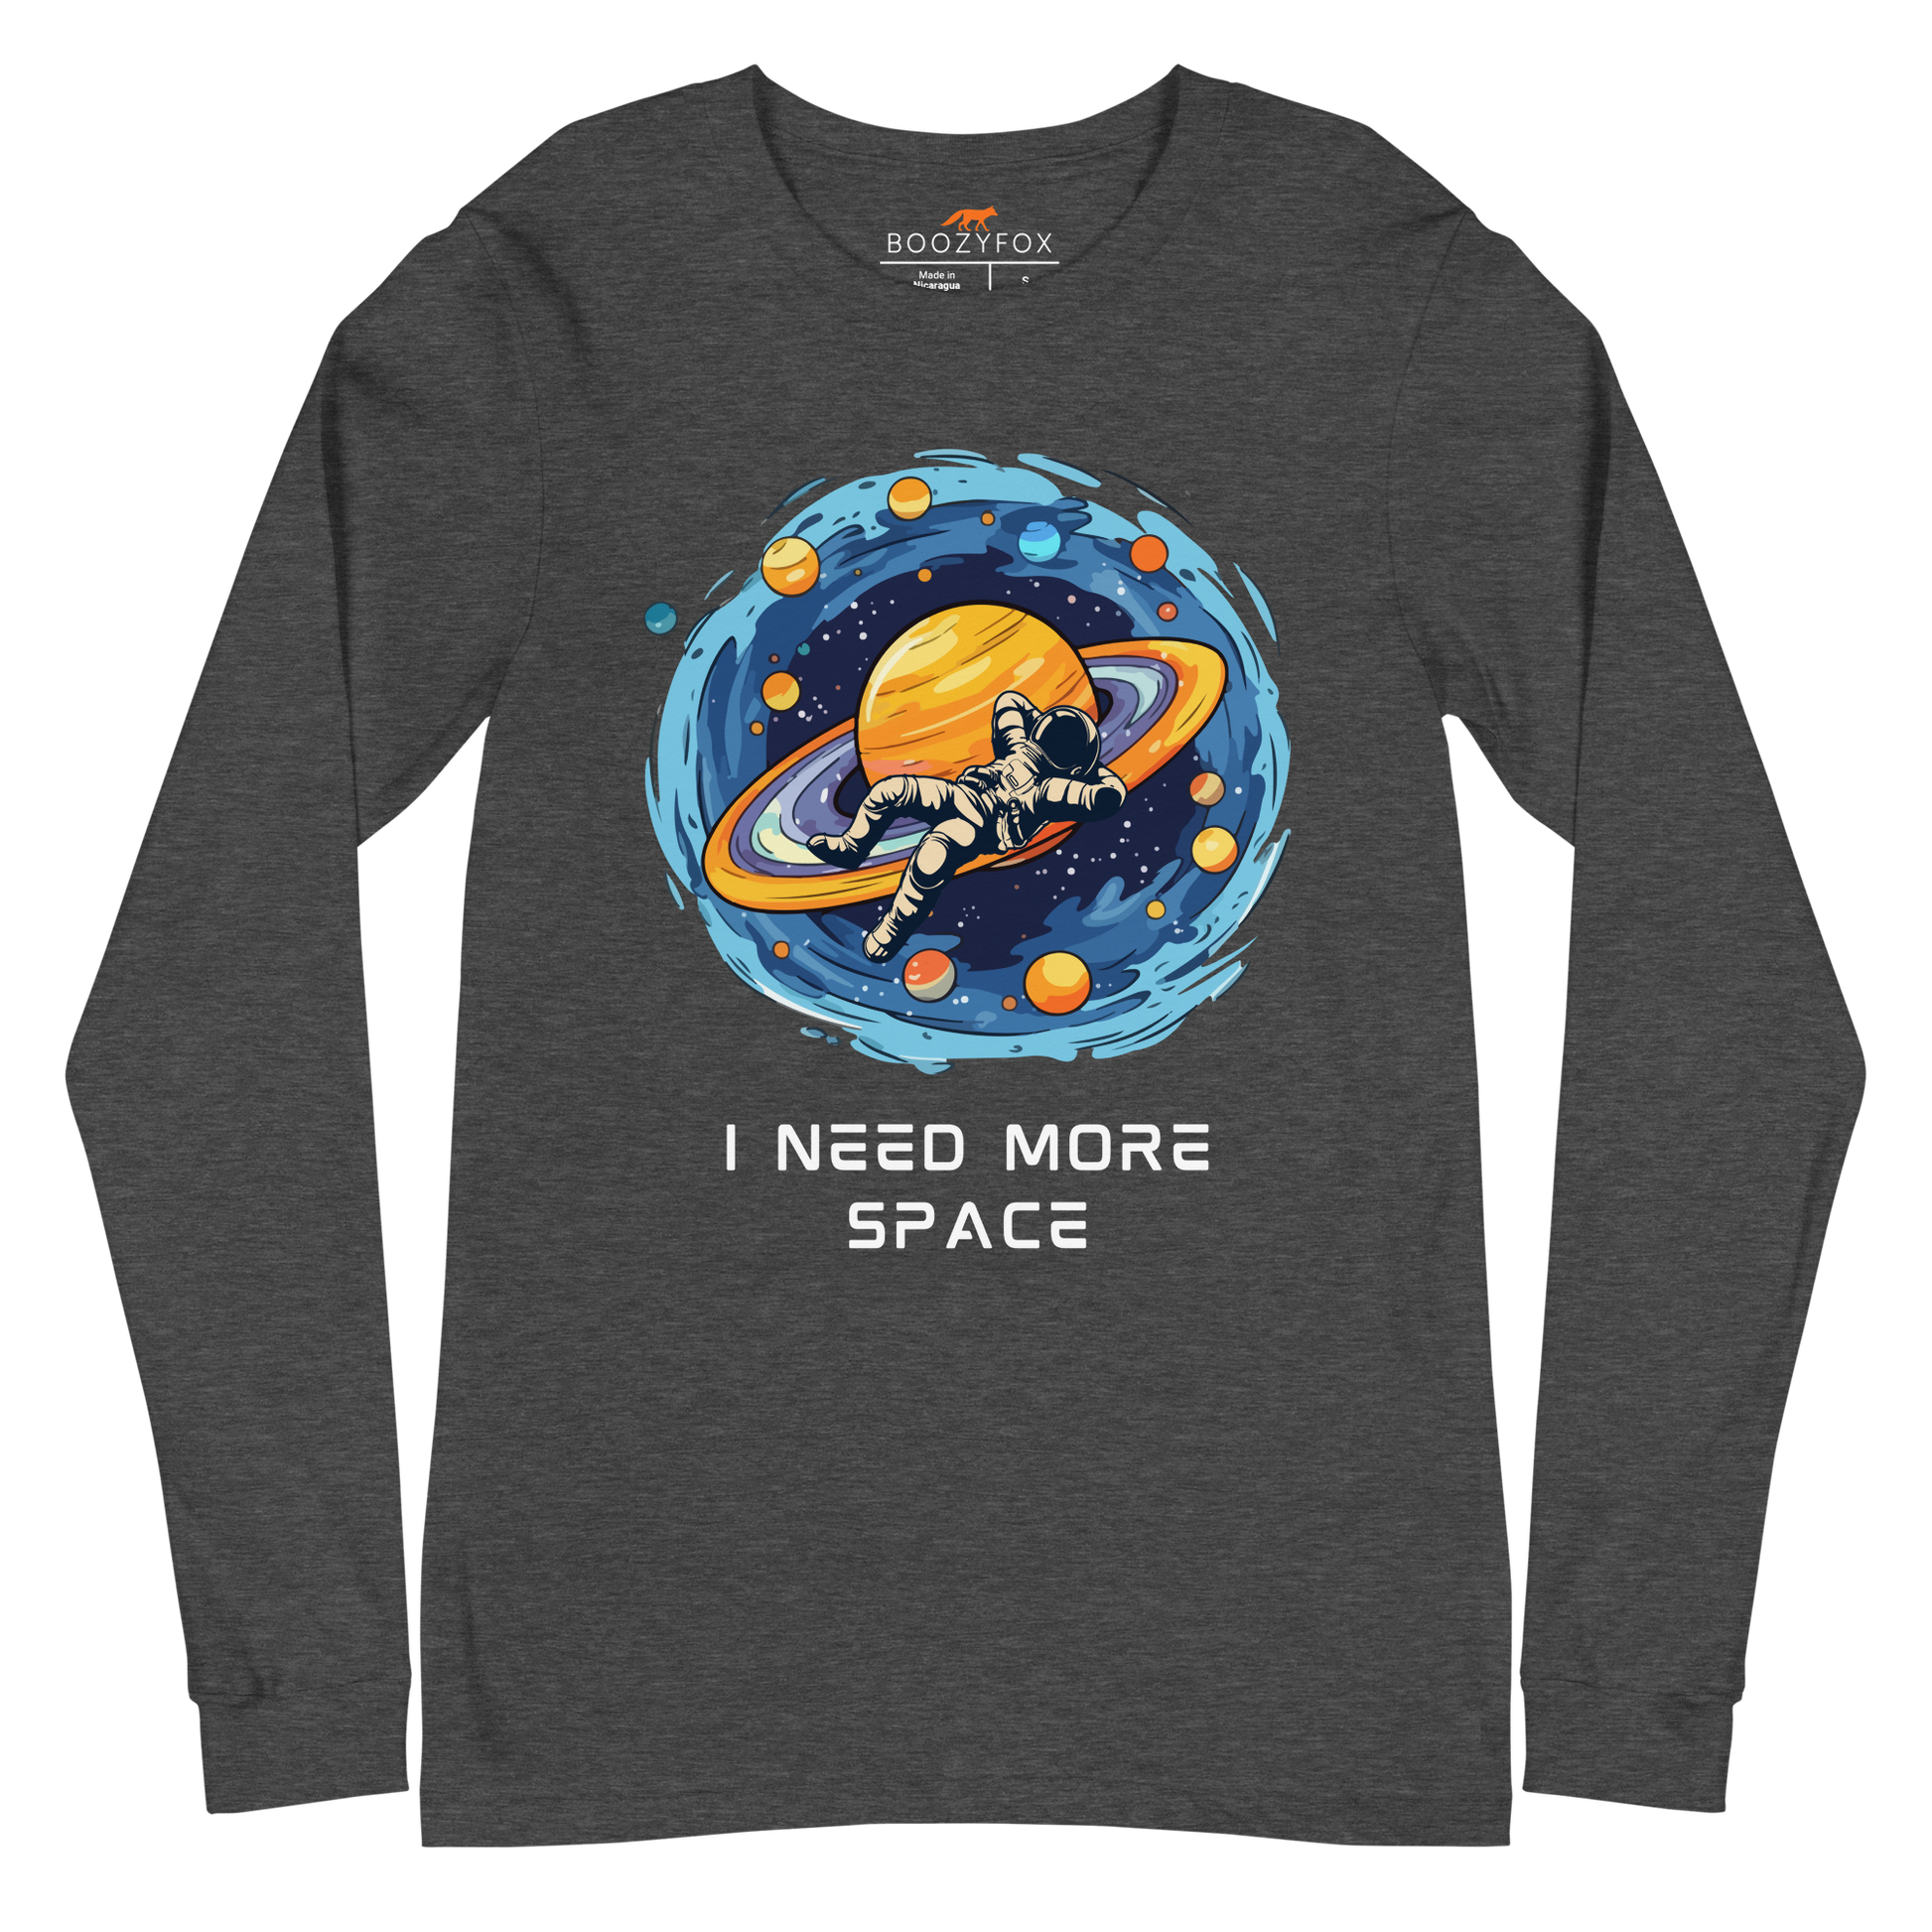 Dark Grey Heather Astronaut Long Sleeve Tee featuring a captivating I Need More Space graphic on the chest - Funny Space Long Sleeve Graphic Tees - Boozy Fox